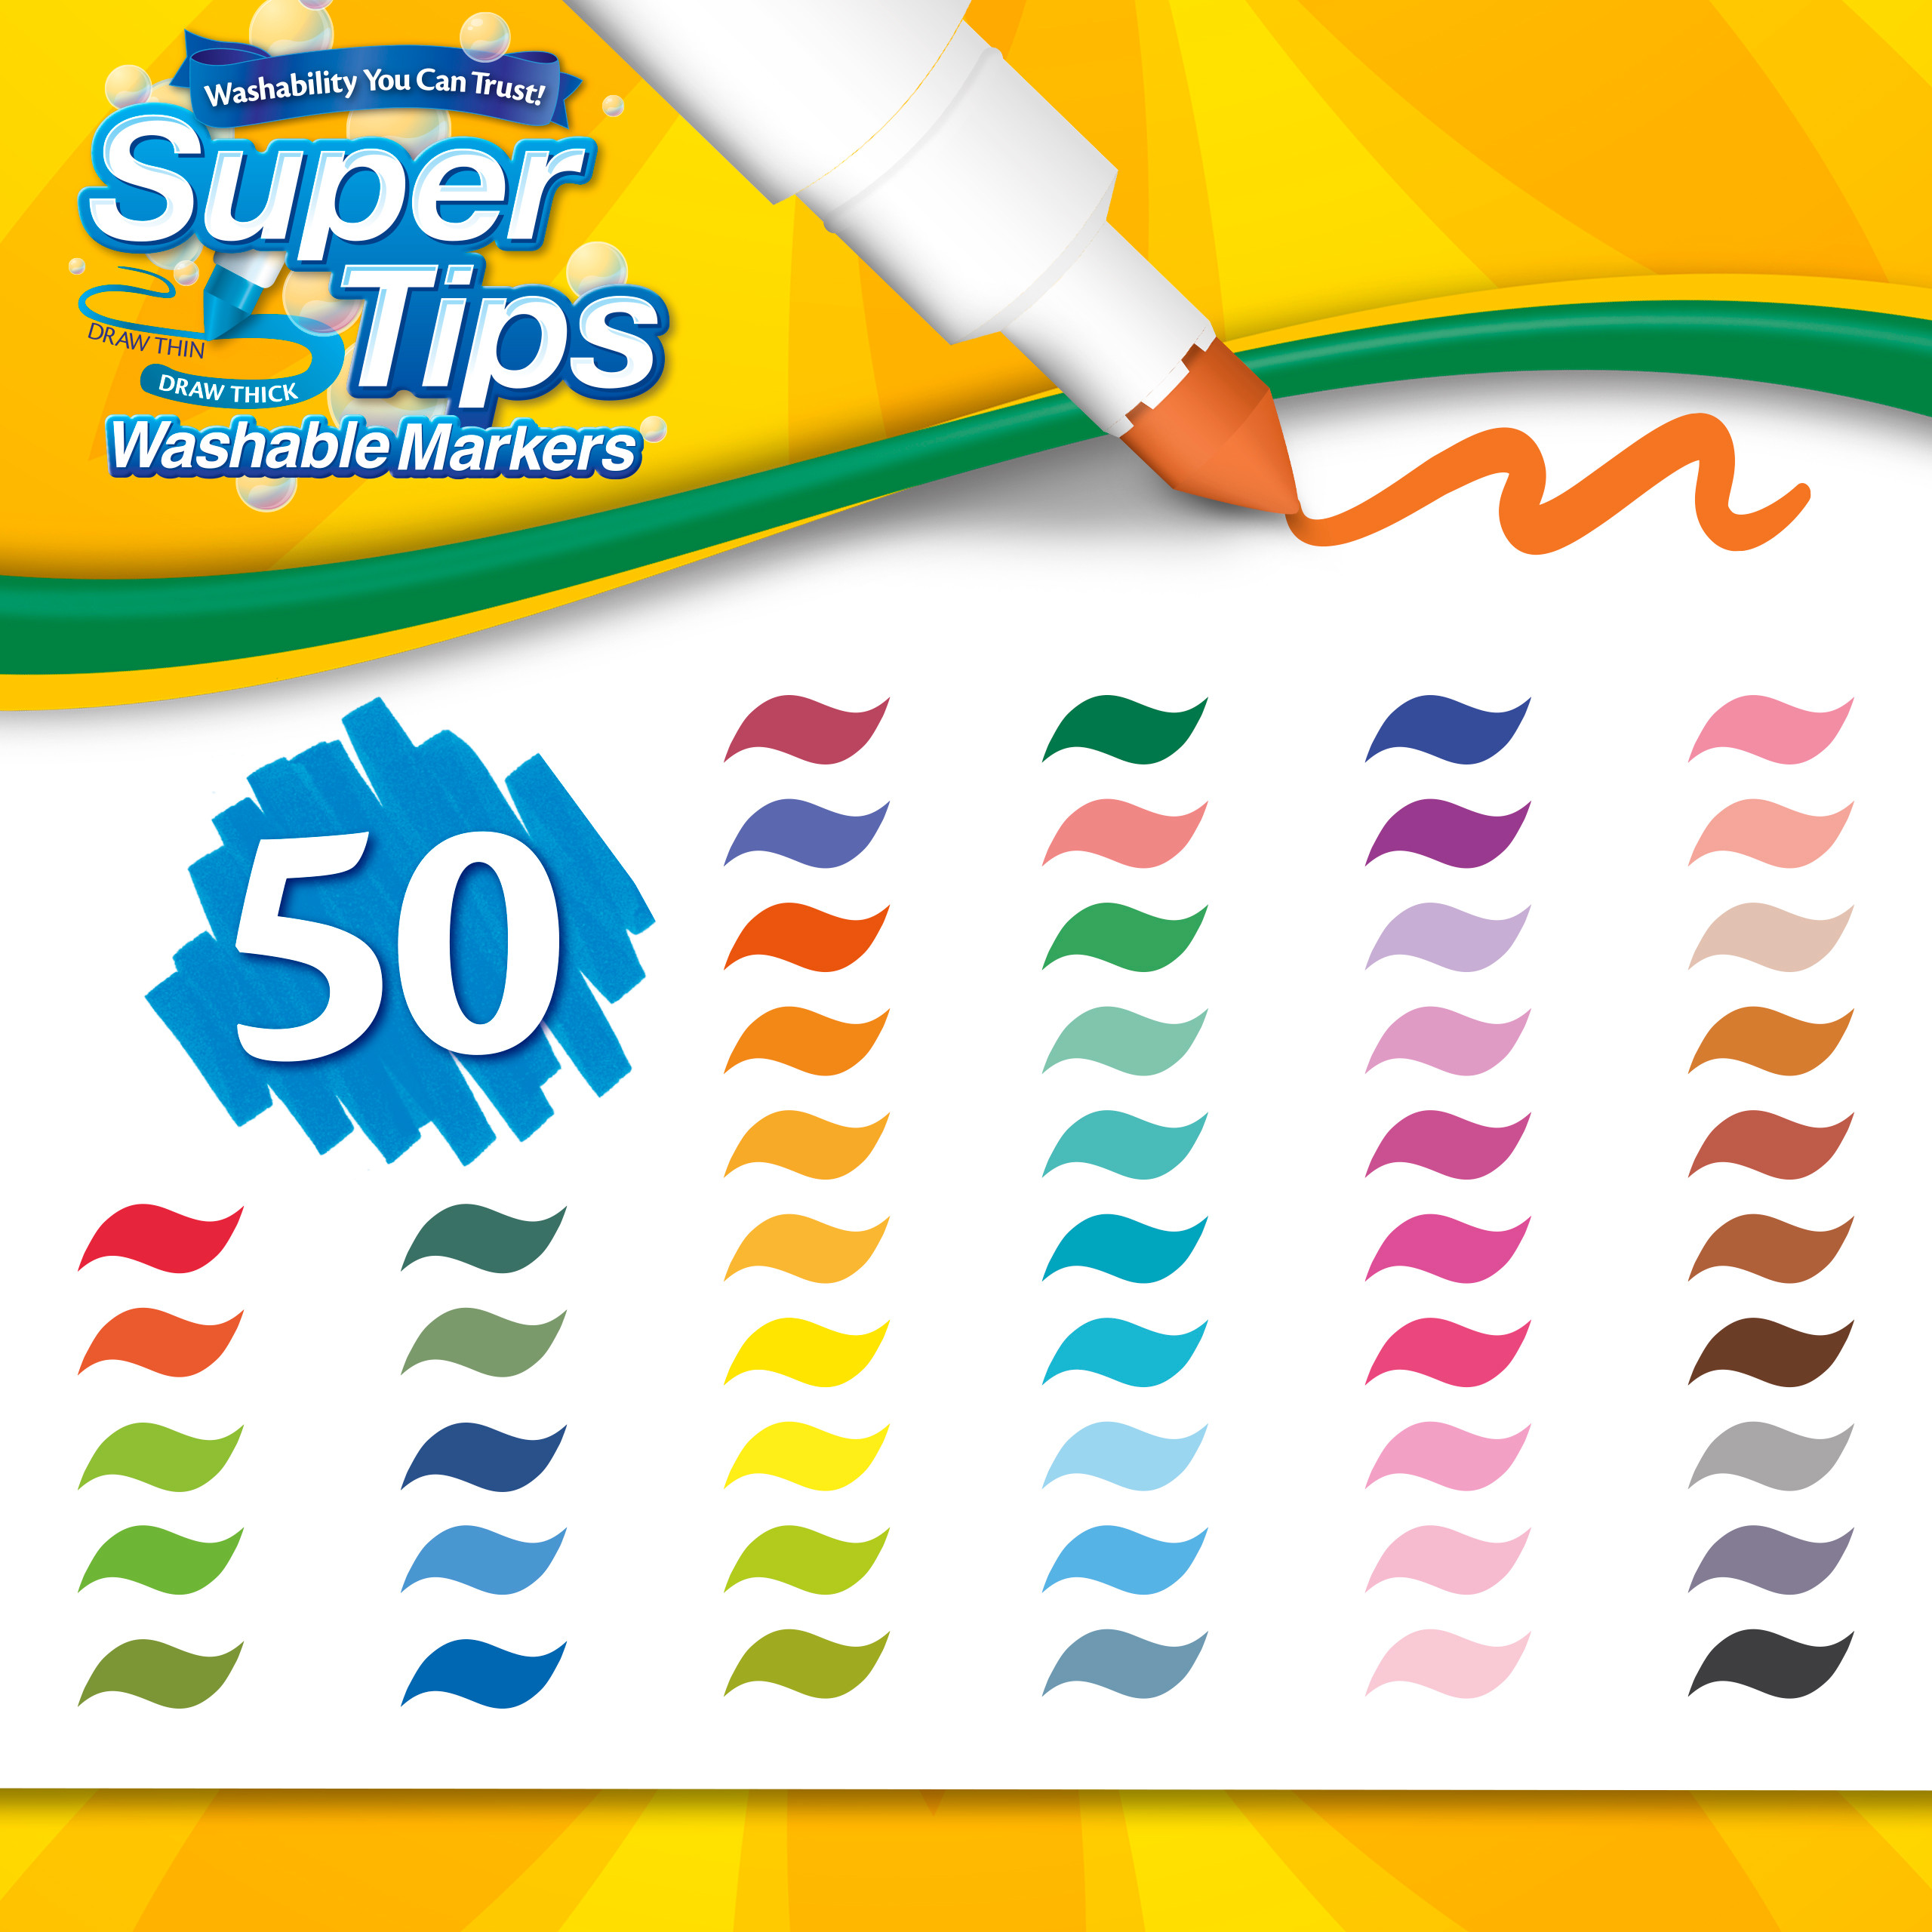 Crayola Super Tips Washable Markers, Back to School Supplies, Art Toys, 50 Assorted Colors, Child - image 8 of 8